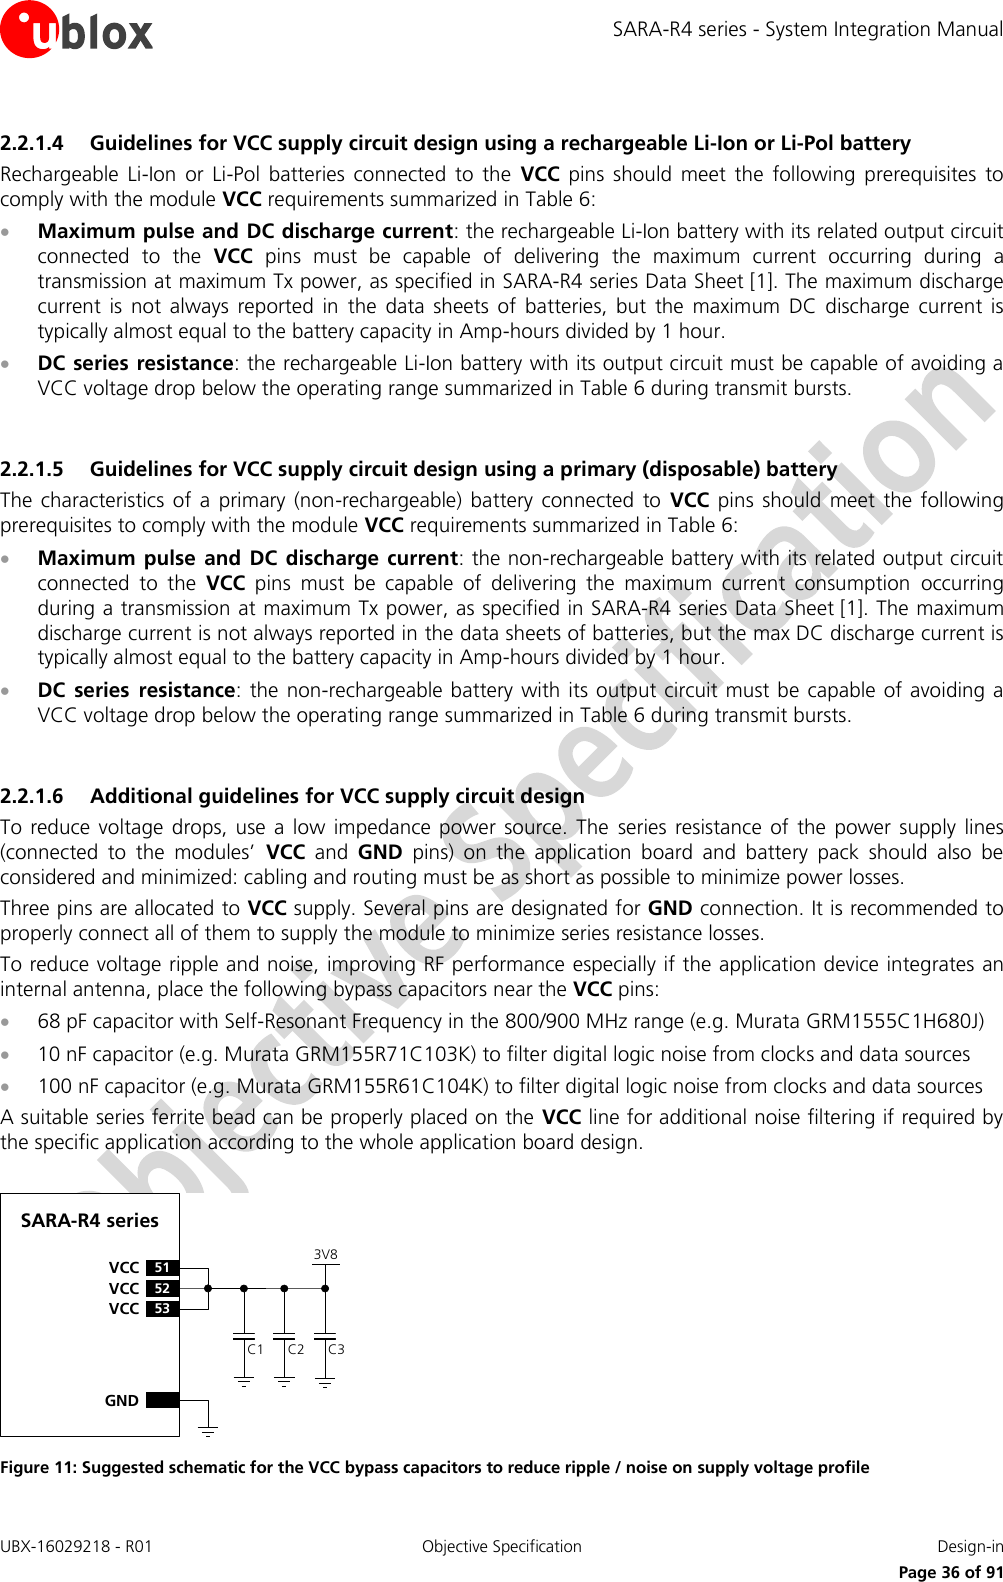 SARA-R4 series - System Integration Manual UBX-16029218 - R01  Objective Specification  Design-in     Page 36 of 91 2.2.1.4 Guidelines for VCC supply circuit design using a rechargeable Li-Ion or Li-Pol battery Rechargeable  Li-Ion  or  Li-Pol  batteries  connected  to  the  VCC  pins  should  meet  the  following  prerequisites  to comply with the module VCC requirements summarized in Table 6:  Maximum pulse and DC discharge current: the rechargeable Li-Ion battery with its related output circuit connected  to  the  VCC  pins  must  be  capable  of  delivering  the  maximum  current  occurring  during  a transmission at maximum Tx power, as specified in SARA-R4 series Data Sheet [1]. The maximum discharge current  is  not  always  reported  in  the  data  sheets  of  batteries,  but  the  maximum  DC  discharge  current  is typically almost equal to the battery capacity in Amp-hours divided by 1 hour.  DC series resistance: the rechargeable Li-Ion battery with its output circuit must be capable of avoiding a VCC voltage drop below the operating range summarized in Table 6 during transmit bursts.  2.2.1.5 Guidelines for VCC supply circuit design using a primary (disposable) battery The  characteristics  of  a  primary (non-rechargeable)  battery  connected  to  VCC  pins  should  meet  the following prerequisites to comply with the module VCC requirements summarized in Table 6:  Maximum  pulse  and  DC  discharge current: the non-rechargeable battery with its related output circuit connected  to  the  VCC  pins  must  be  capable  of  delivering  the  maximum  current  consumption  occurring during a transmission at maximum Tx power, as specified in SARA-R4 series Data Sheet [1]. The maximum discharge current is not always reported in the data sheets of batteries, but the max DC discharge current is typically almost equal to the battery capacity in Amp-hours divided by 1 hour.  DC  series  resistance:  the  non-rechargeable battery  with its  output circuit must be capable of avoiding a VCC voltage drop below the operating range summarized in Table 6 during transmit bursts.  2.2.1.6 Additional guidelines for VCC supply circuit design To reduce  voltage  drops,  use  a  low  impedance  power  source.  The  series  resistance  of  the  power supply  lines (connected  to  the  modules’  VCC  and  GND  pins)  on  the  application  board  and  battery  pack  should  also  be considered and minimized: cabling and routing must be as short as possible to minimize power losses. Three pins are allocated to VCC supply. Several pins are designated for GND connection. It is recommended to properly connect all of them to supply the module to minimize series resistance losses. To reduce voltage ripple and noise, improving RF performance especially if the application device integrates an internal antenna, place the following bypass capacitors near the VCC pins:  68 pF capacitor with Self-Resonant Frequency in the 800/900 MHz range (e.g. Murata GRM1555C1H680J)   10 nF capacitor (e.g. Murata GRM155R71C103K) to filter digital logic noise from clocks and data sources  100 nF capacitor (e.g. Murata GRM155R61C104K) to filter digital logic noise from clocks and data sources A suitable series ferrite bead can be properly placed on the VCC line for additional noise filtering if required by the specific application according to the whole application board design.  C2GNDC3SARA-R4 series52VCC53VCC51VCCC13V8 Figure 11: Suggested schematic for the VCC bypass capacitors to reduce ripple / noise on supply voltage profile  